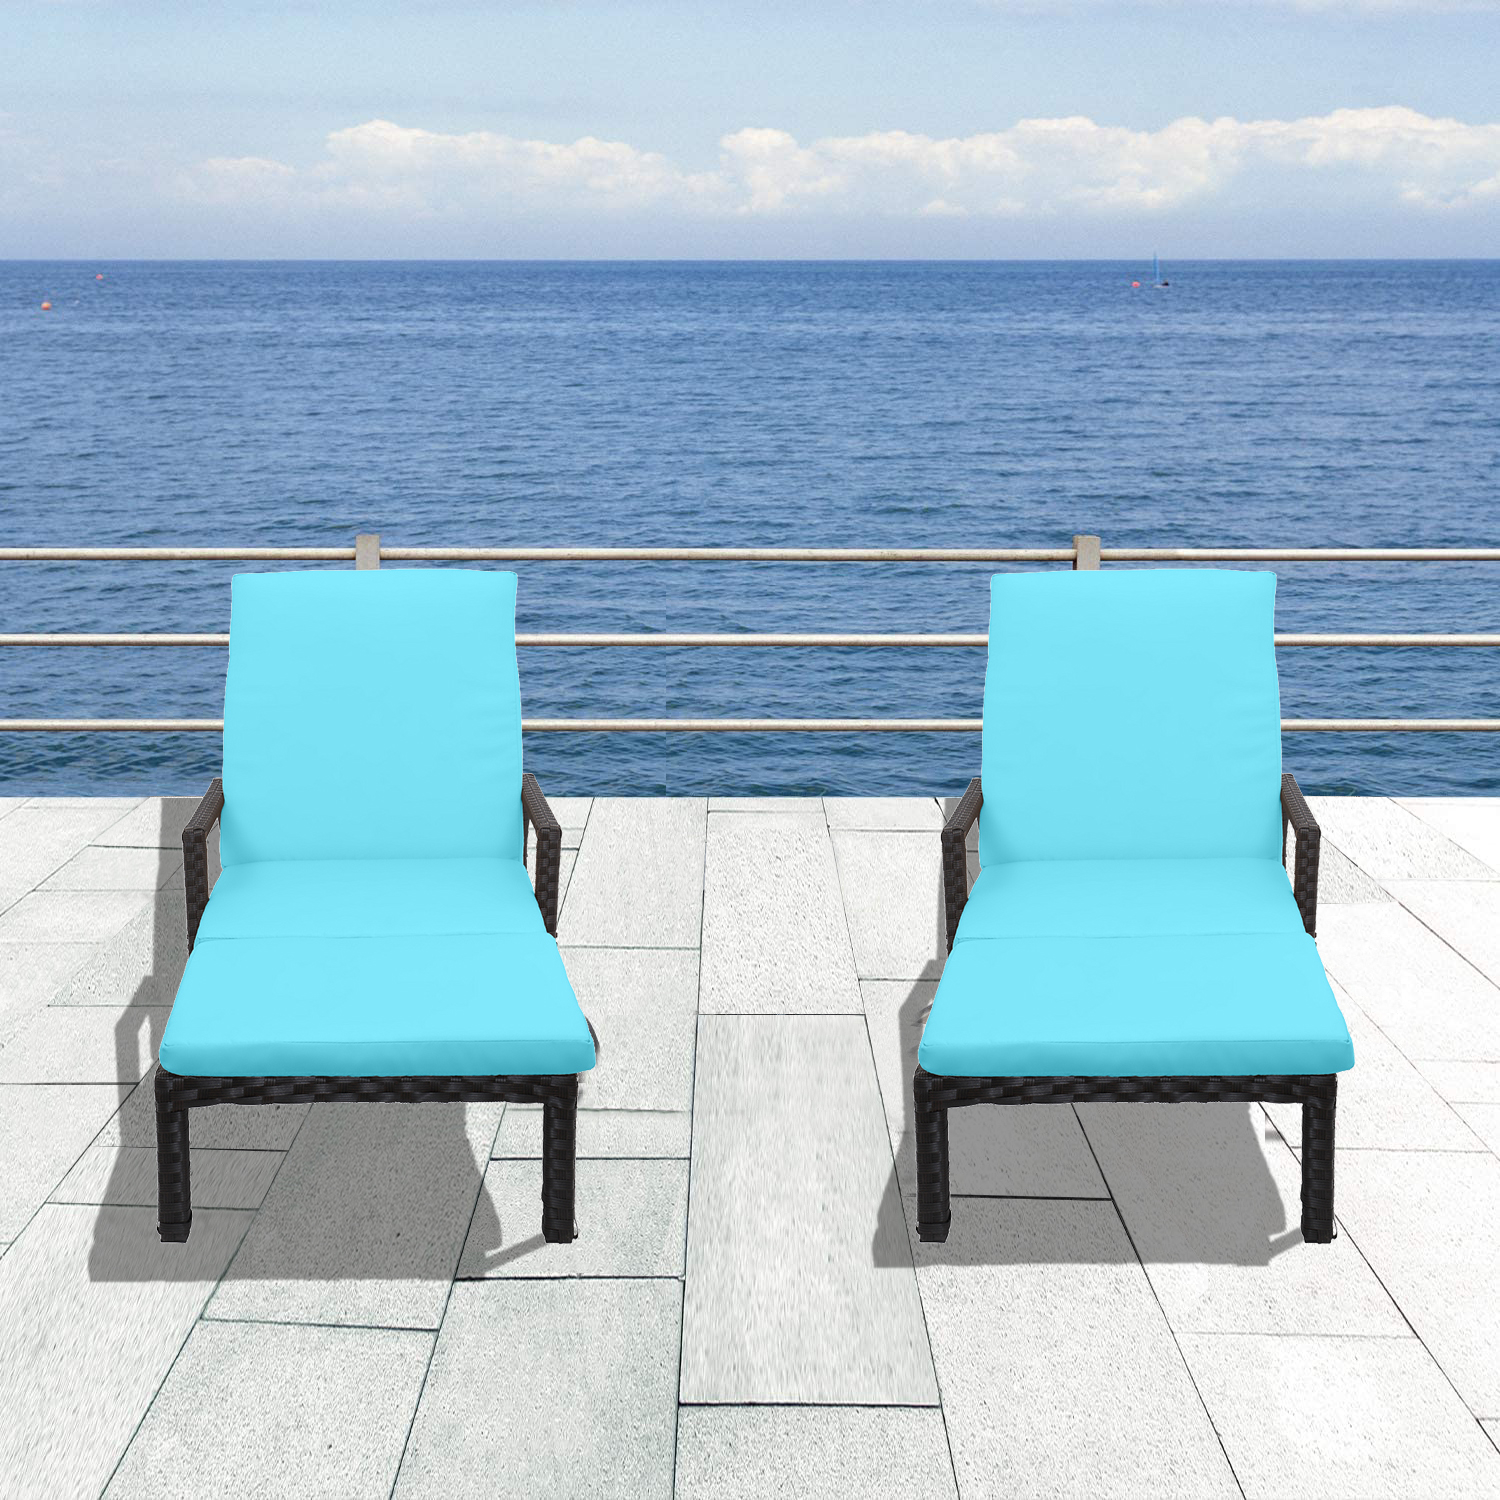 Outdoor Lounge Chair Set of 2, BTMWAY Adjustable Wicker Chaise Lounges for Patio, Outdoor PE Rattan Chaise Lounge Chairs with Blue Cushion and Wheels, Patio Furniture Recliner for Poolside Deck - image 3 of 14